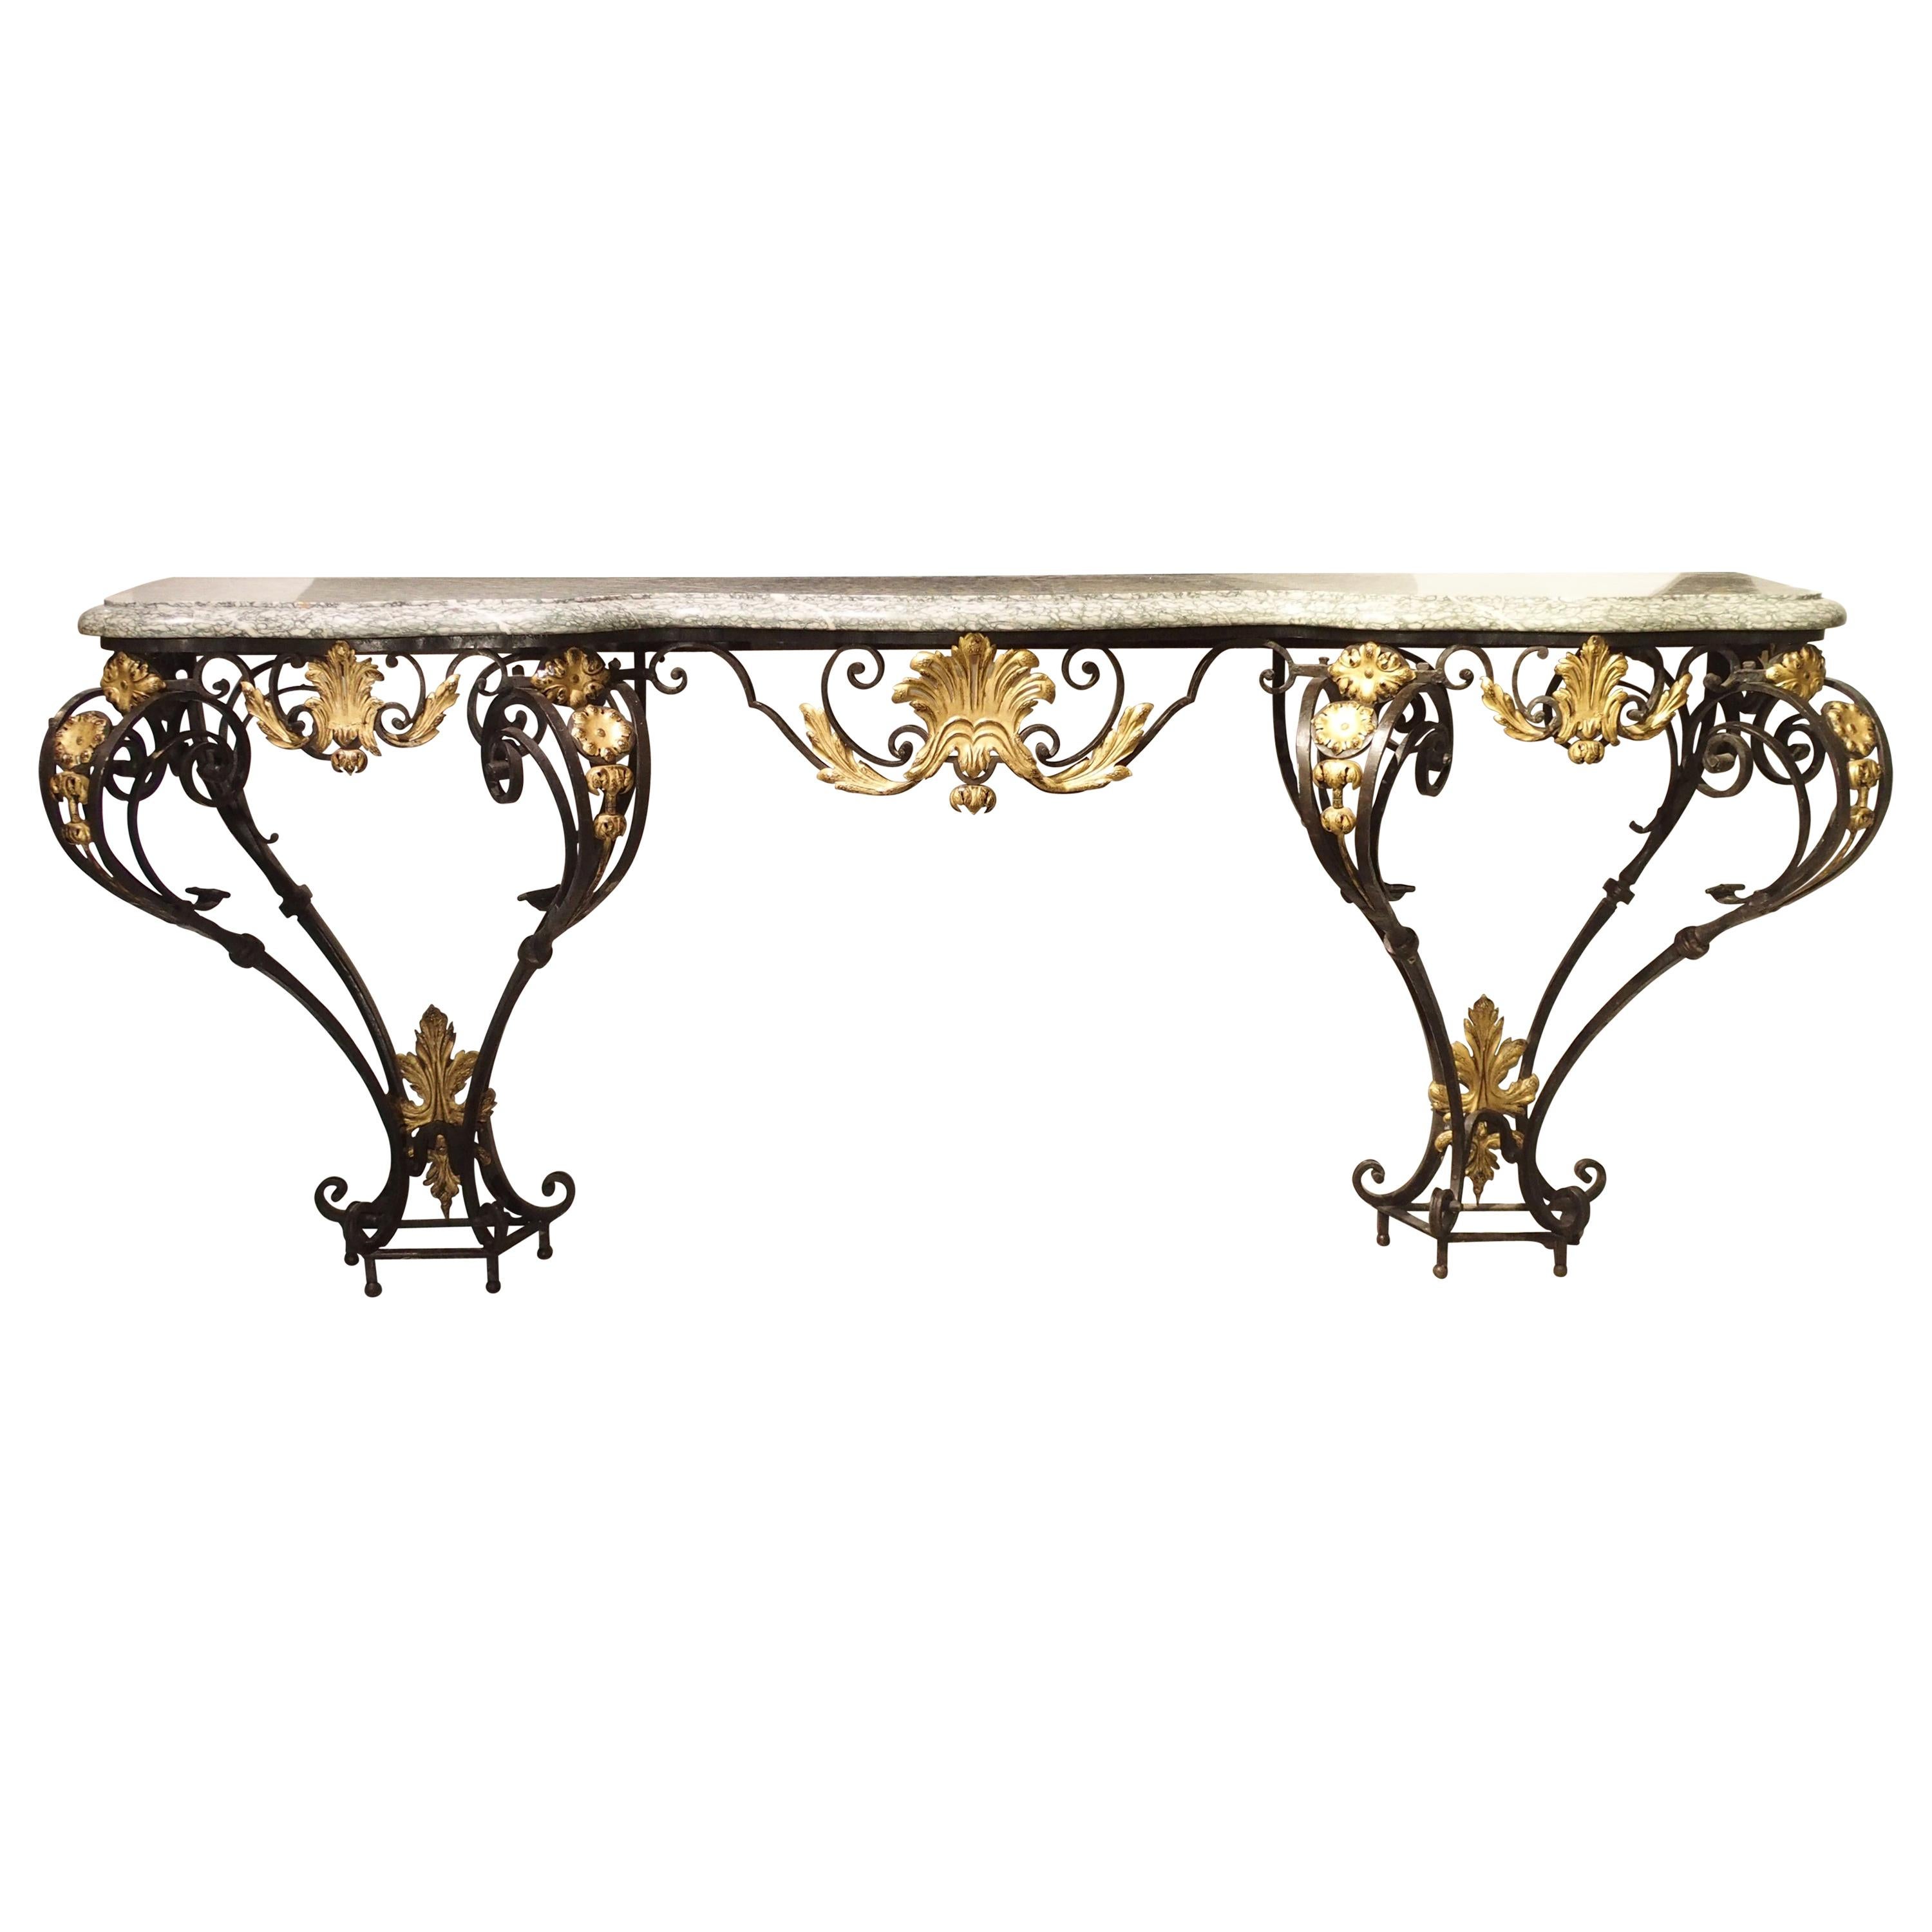 Antique Forged Iron and Gilt Tole Console Table with Marble Top, circa 1850